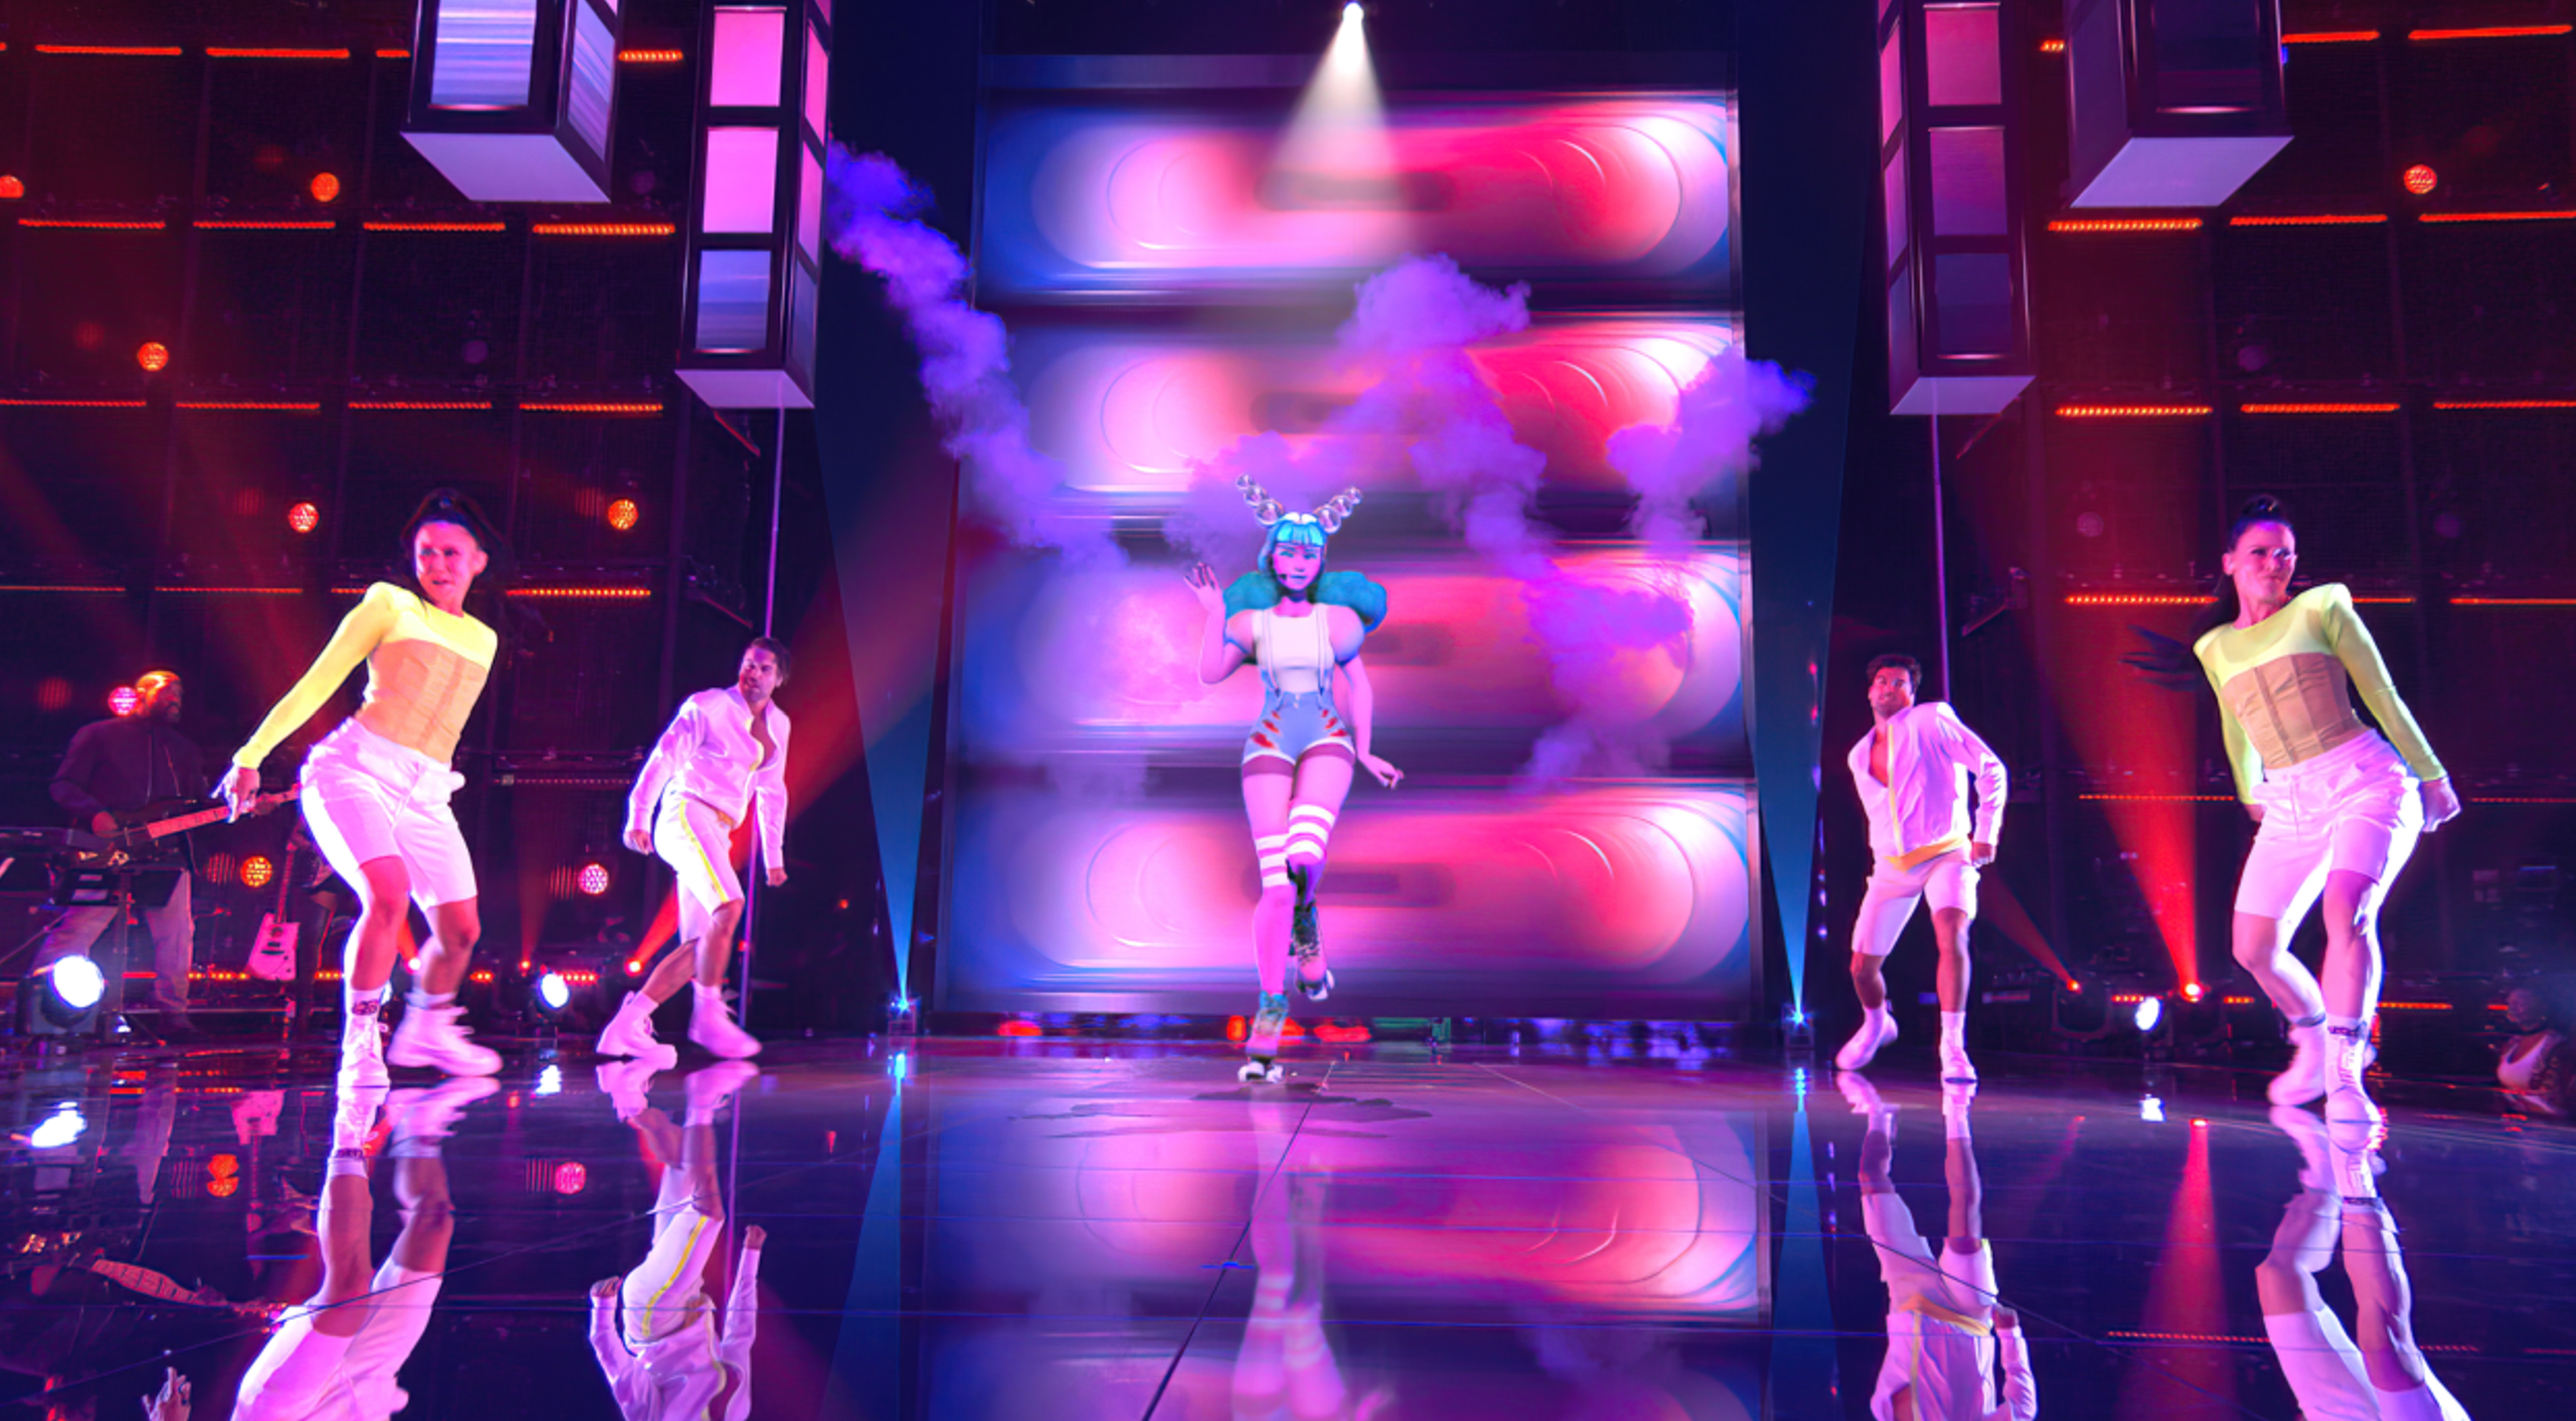 AR avatar Misty Rose created by Pixotope performing on stage